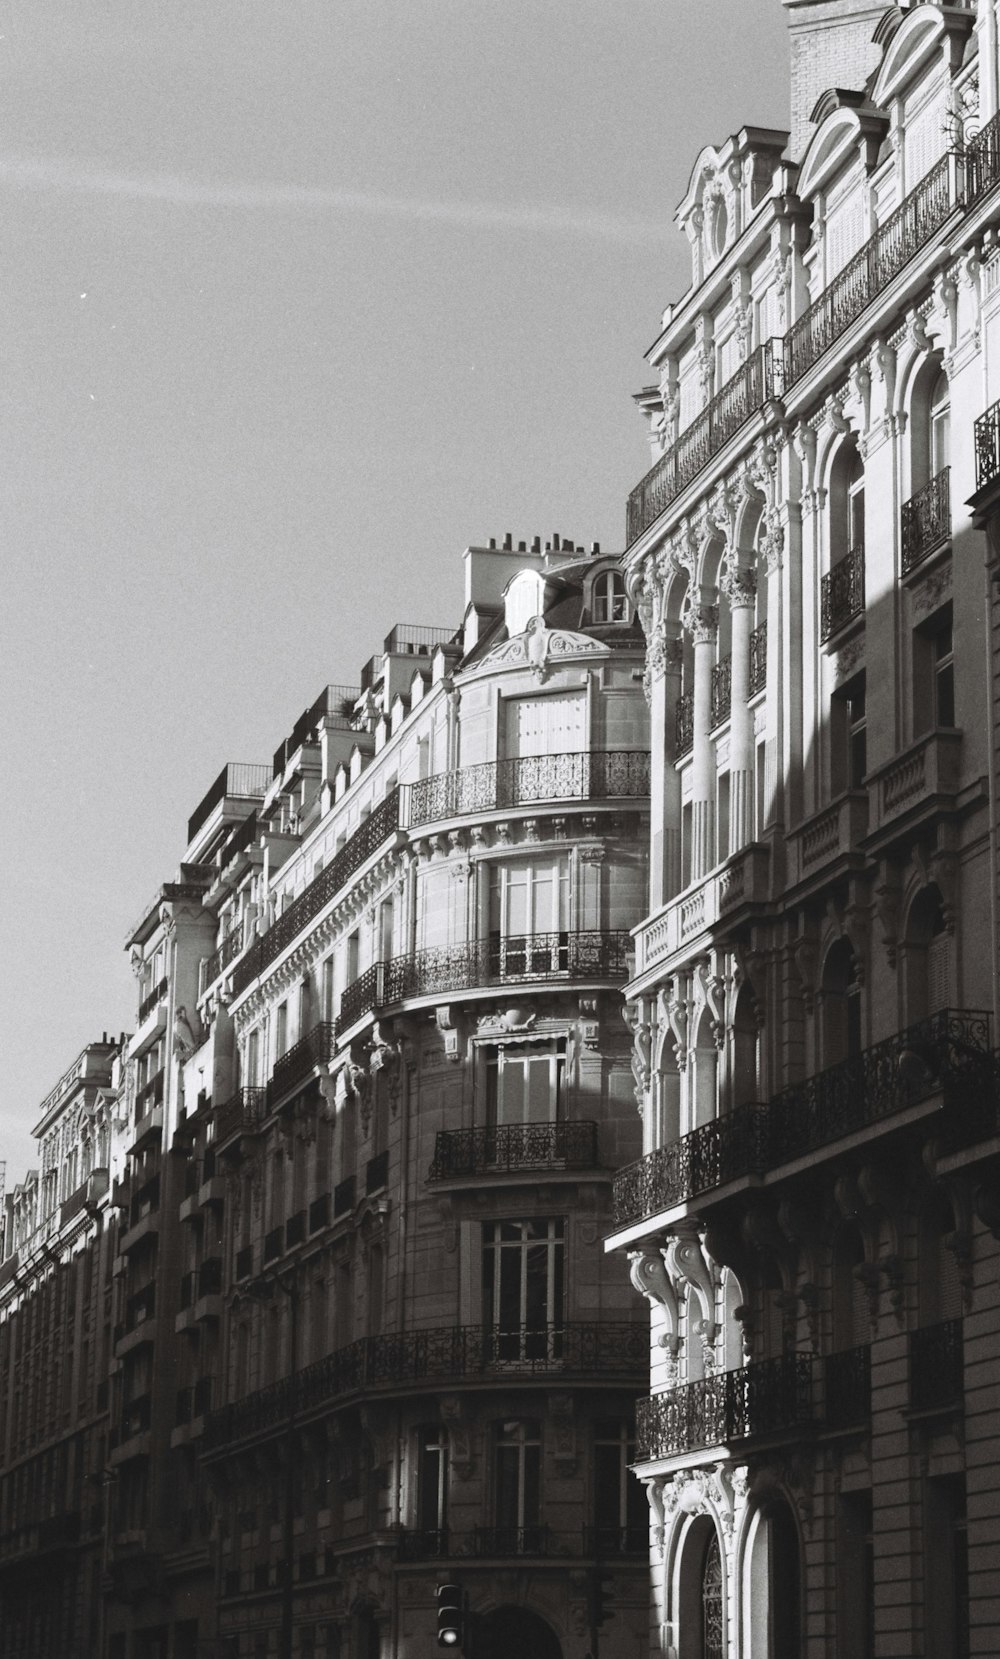 a black and white photo of a building with a clock